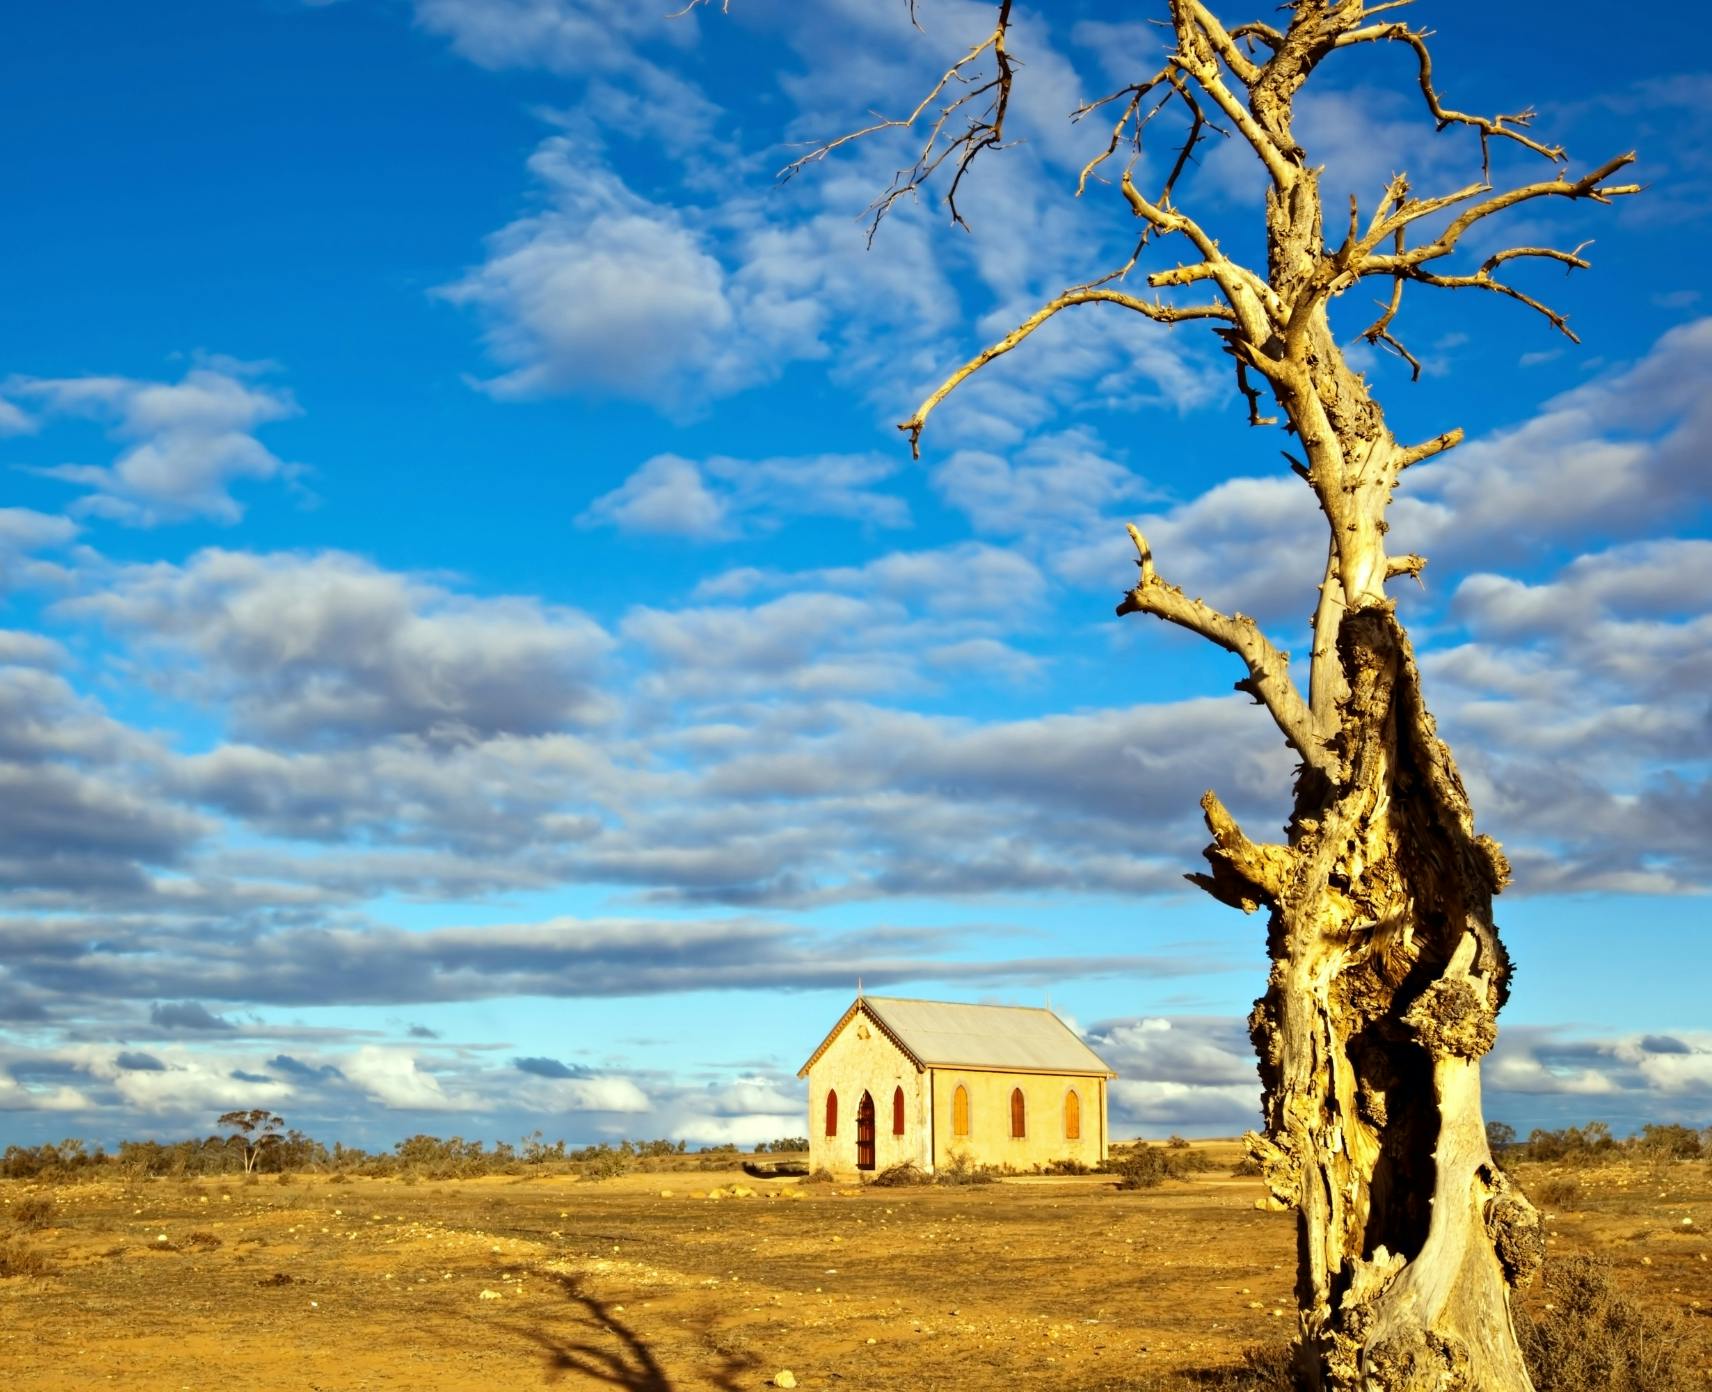 Abandoned church in the desert, in sunset light. Dead tree in foreground. Silverton, New South Wales, Australia.